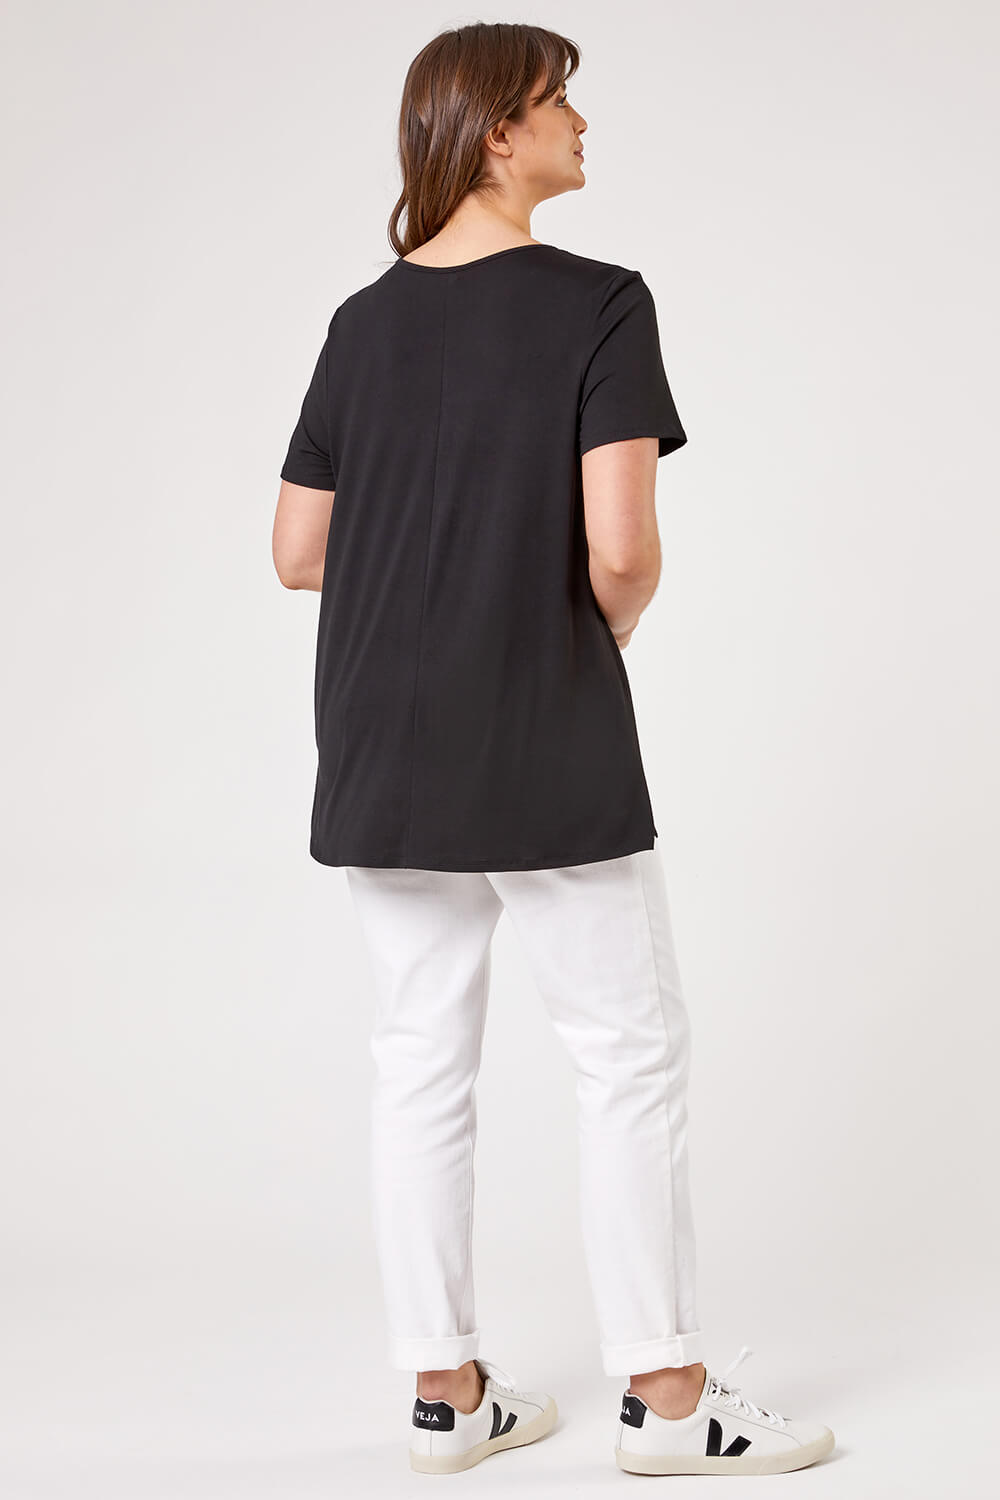 Black Curve Pleat Front Jersey Tunic Top, Image 2 of 4